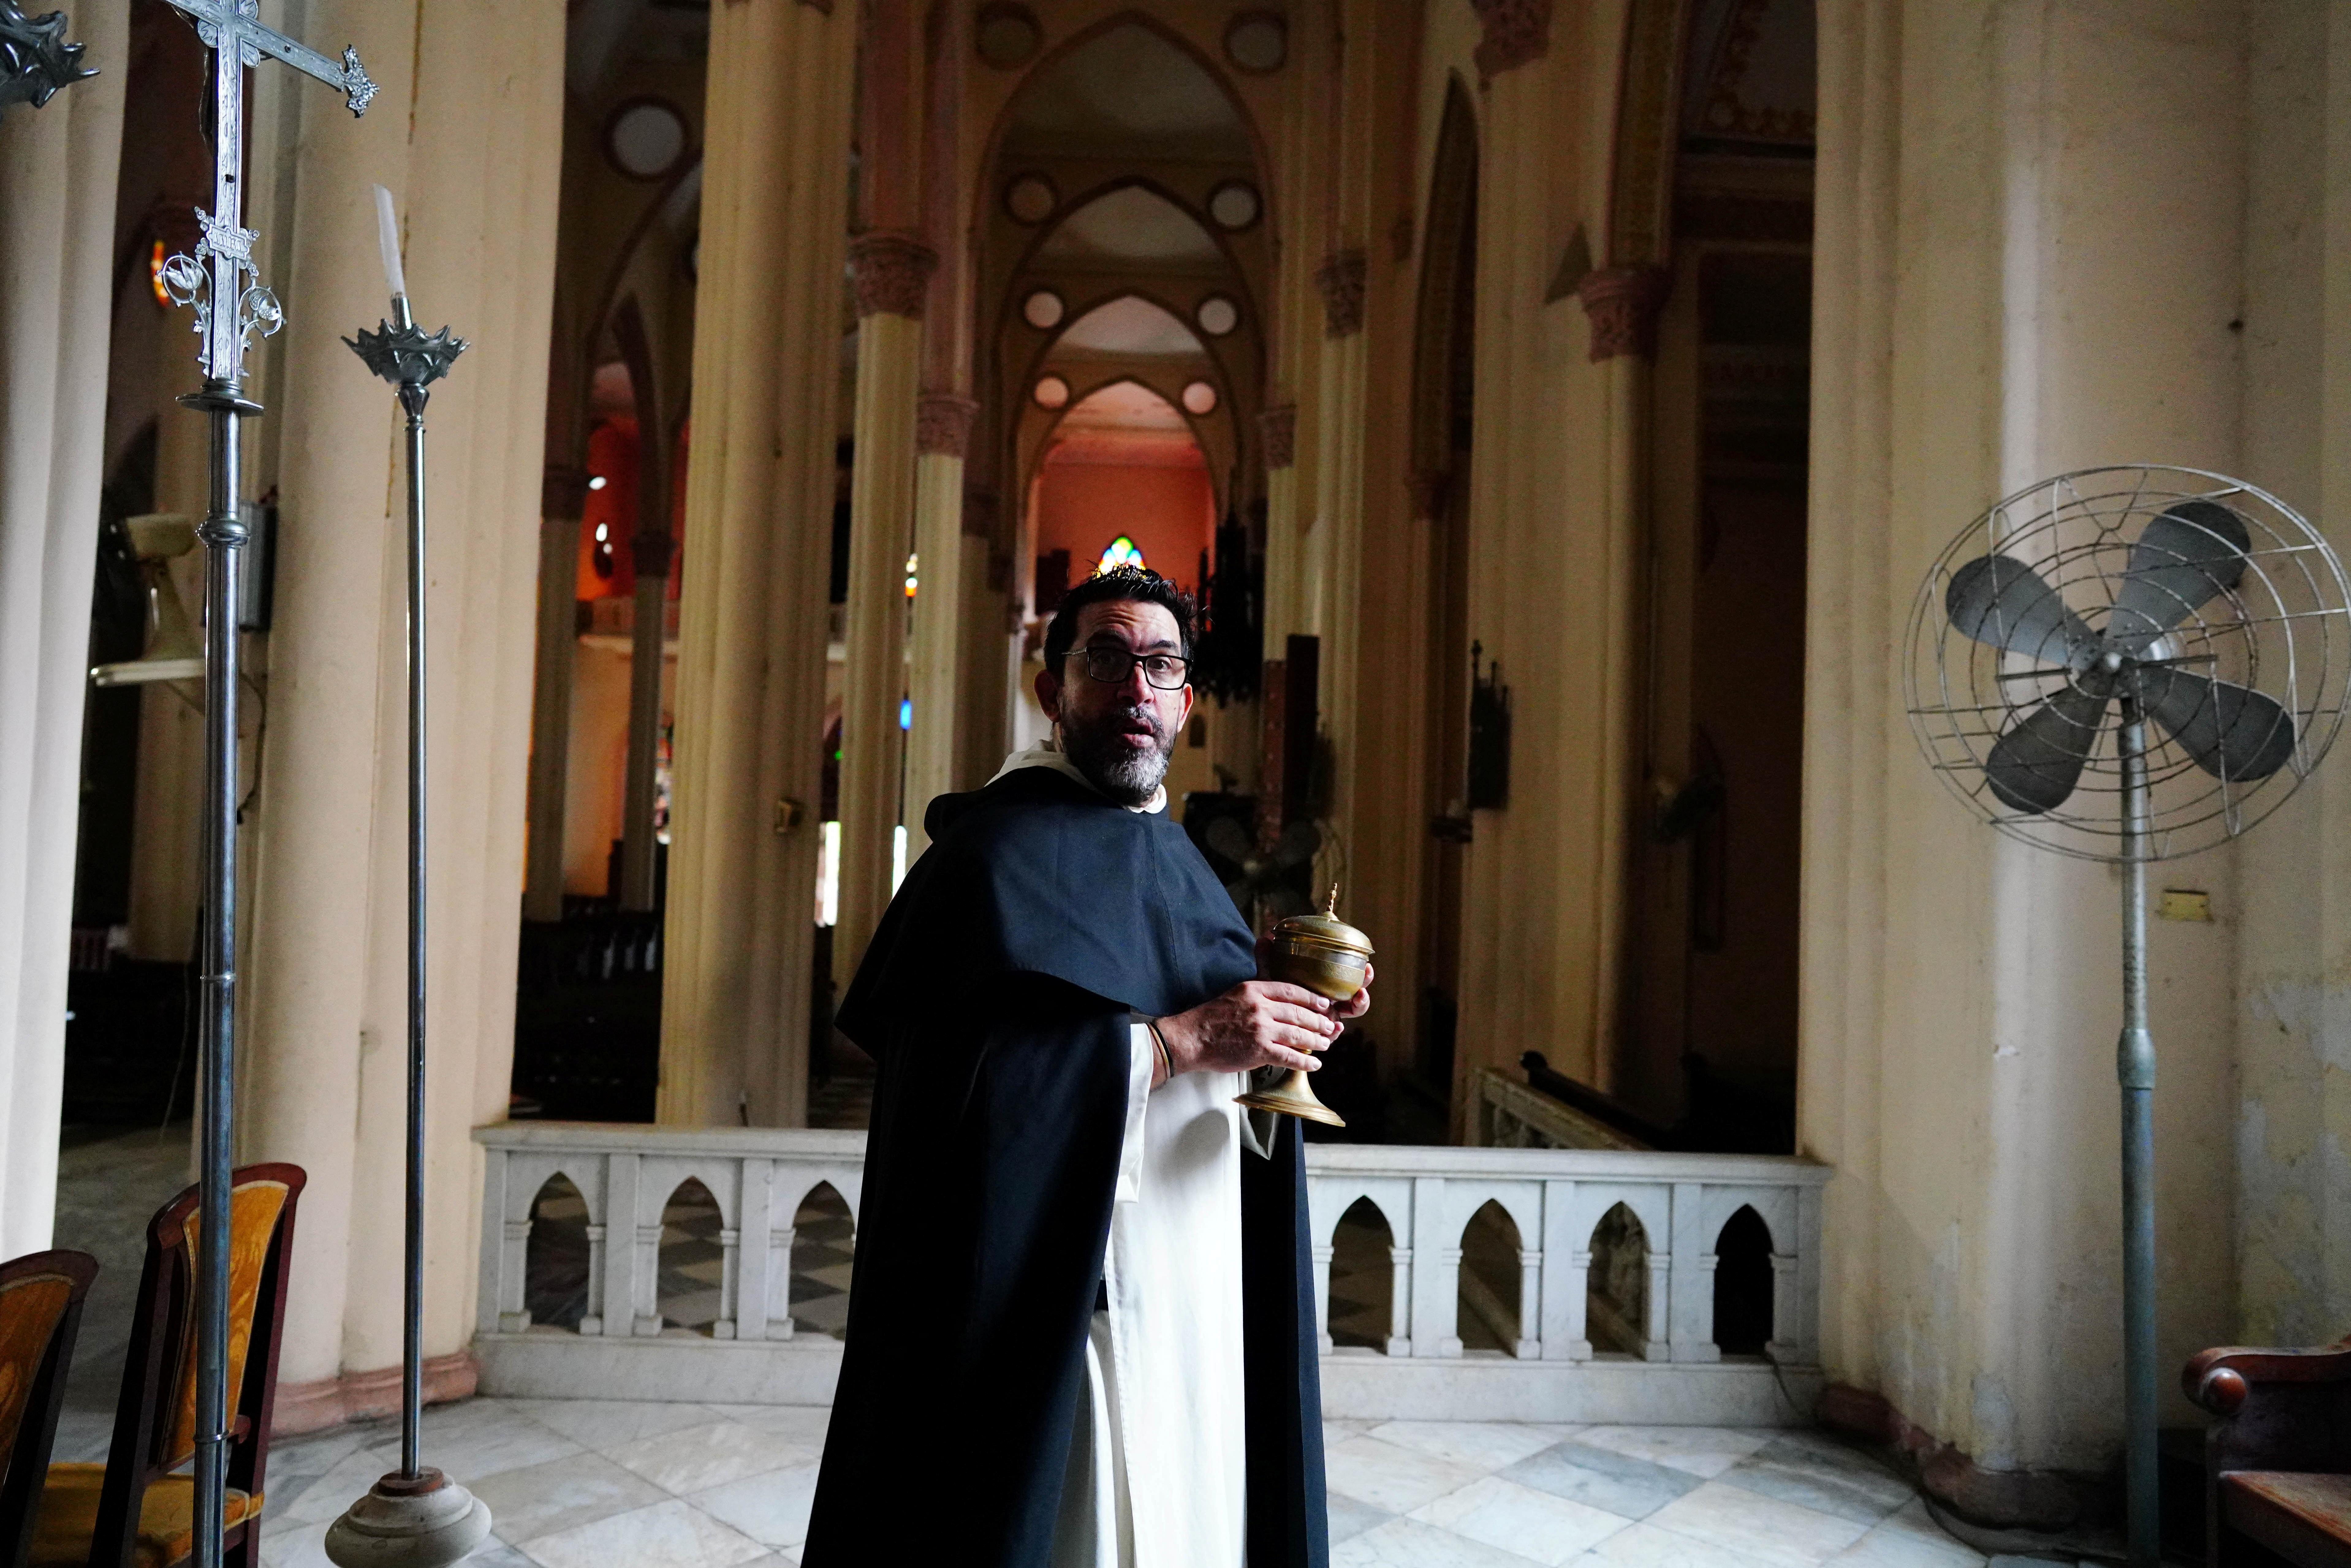 Priest Lester Zayas prepares the church for the Holy Week celebrations in Havana